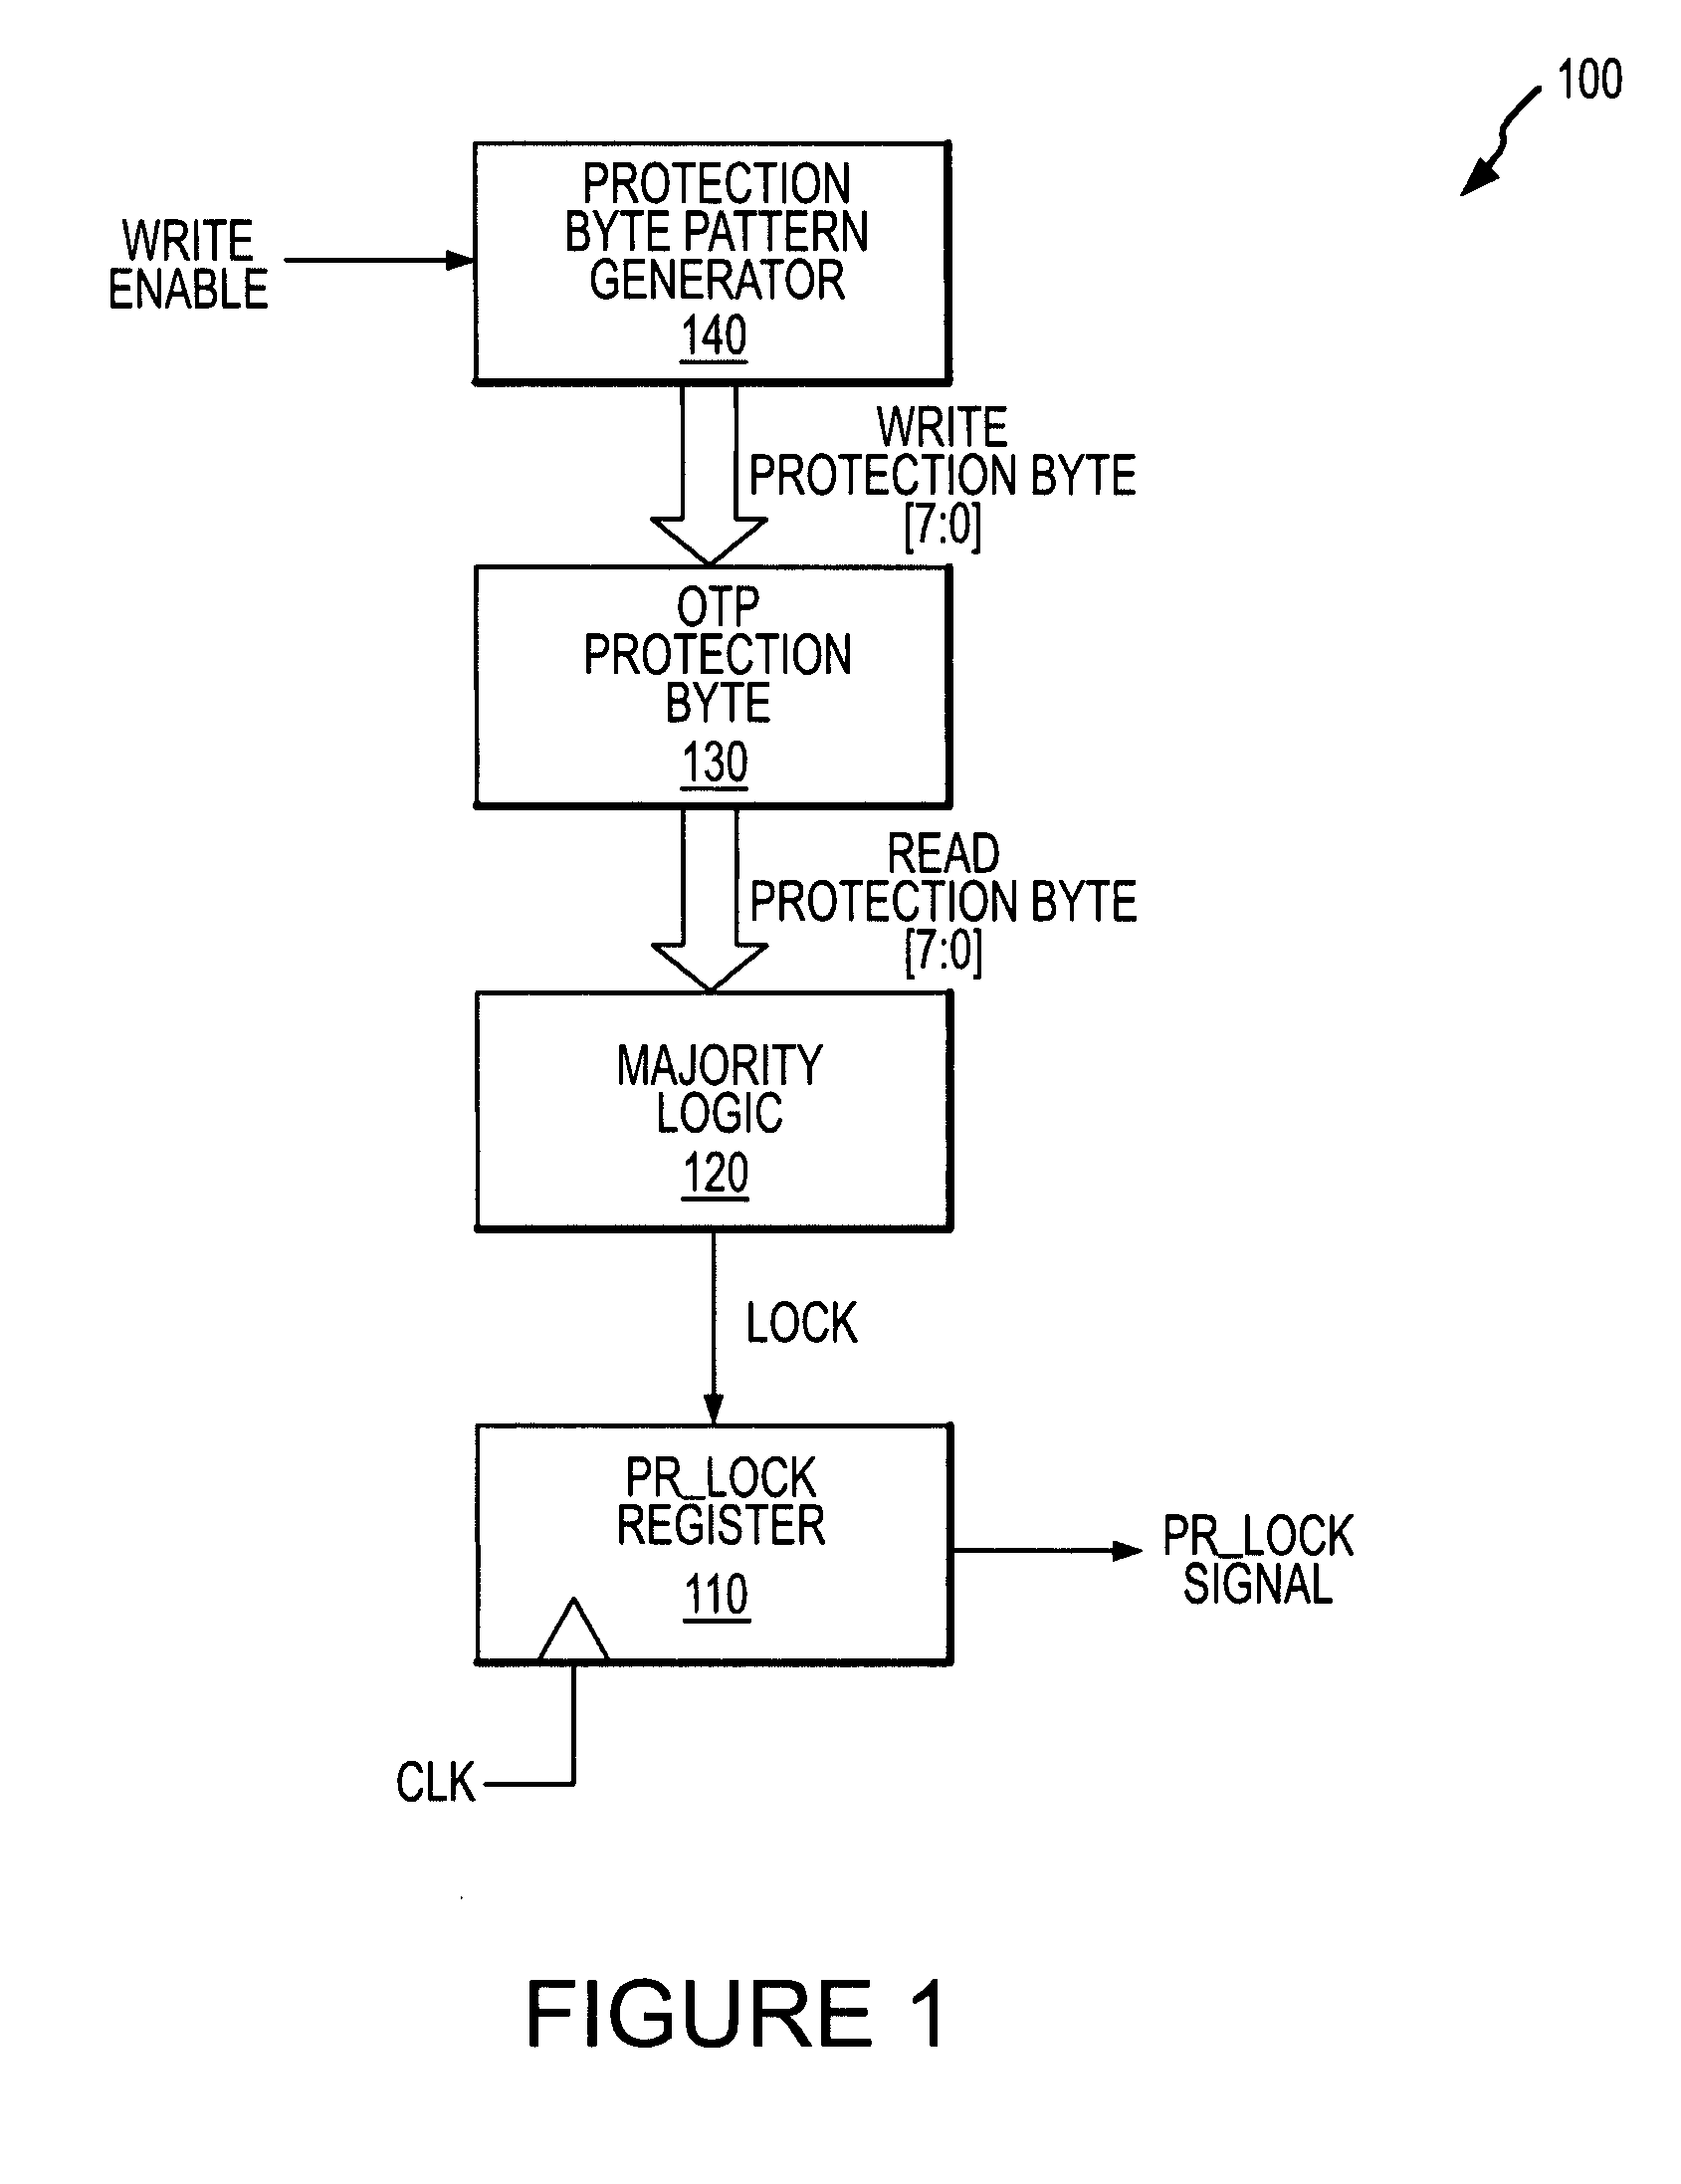 Memory area protection system and methods